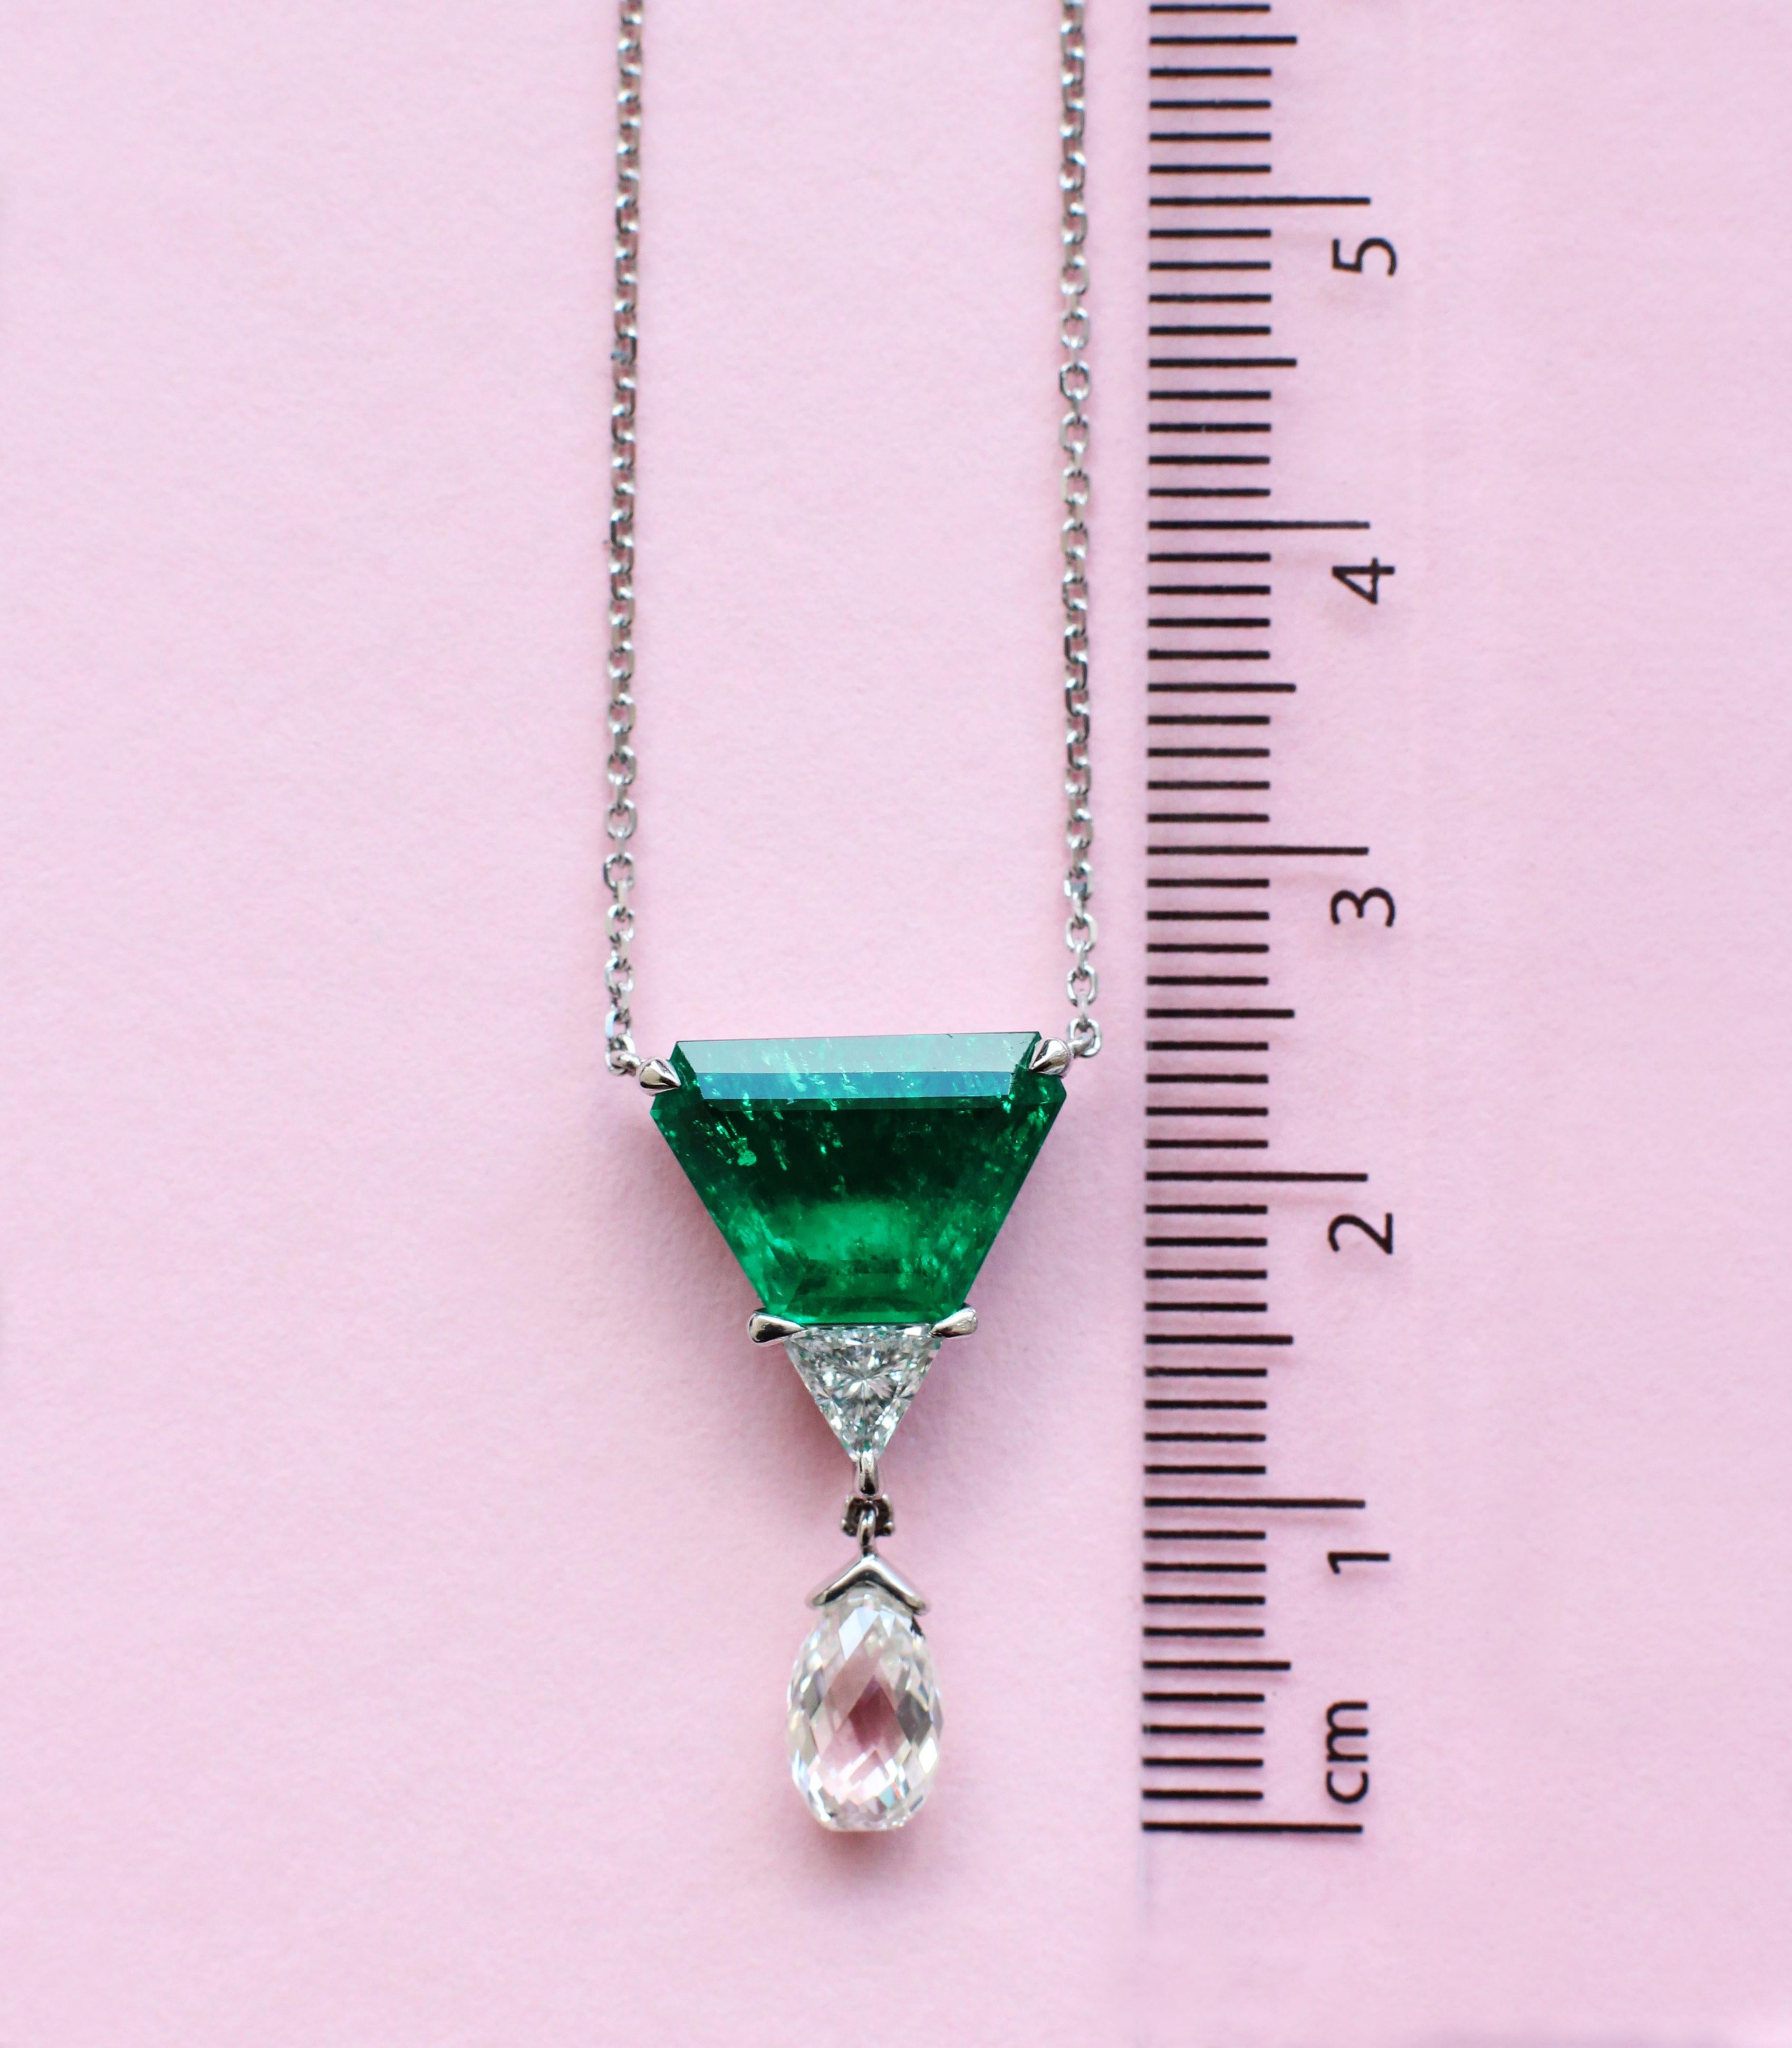 is the exquisite emerald necklace rare